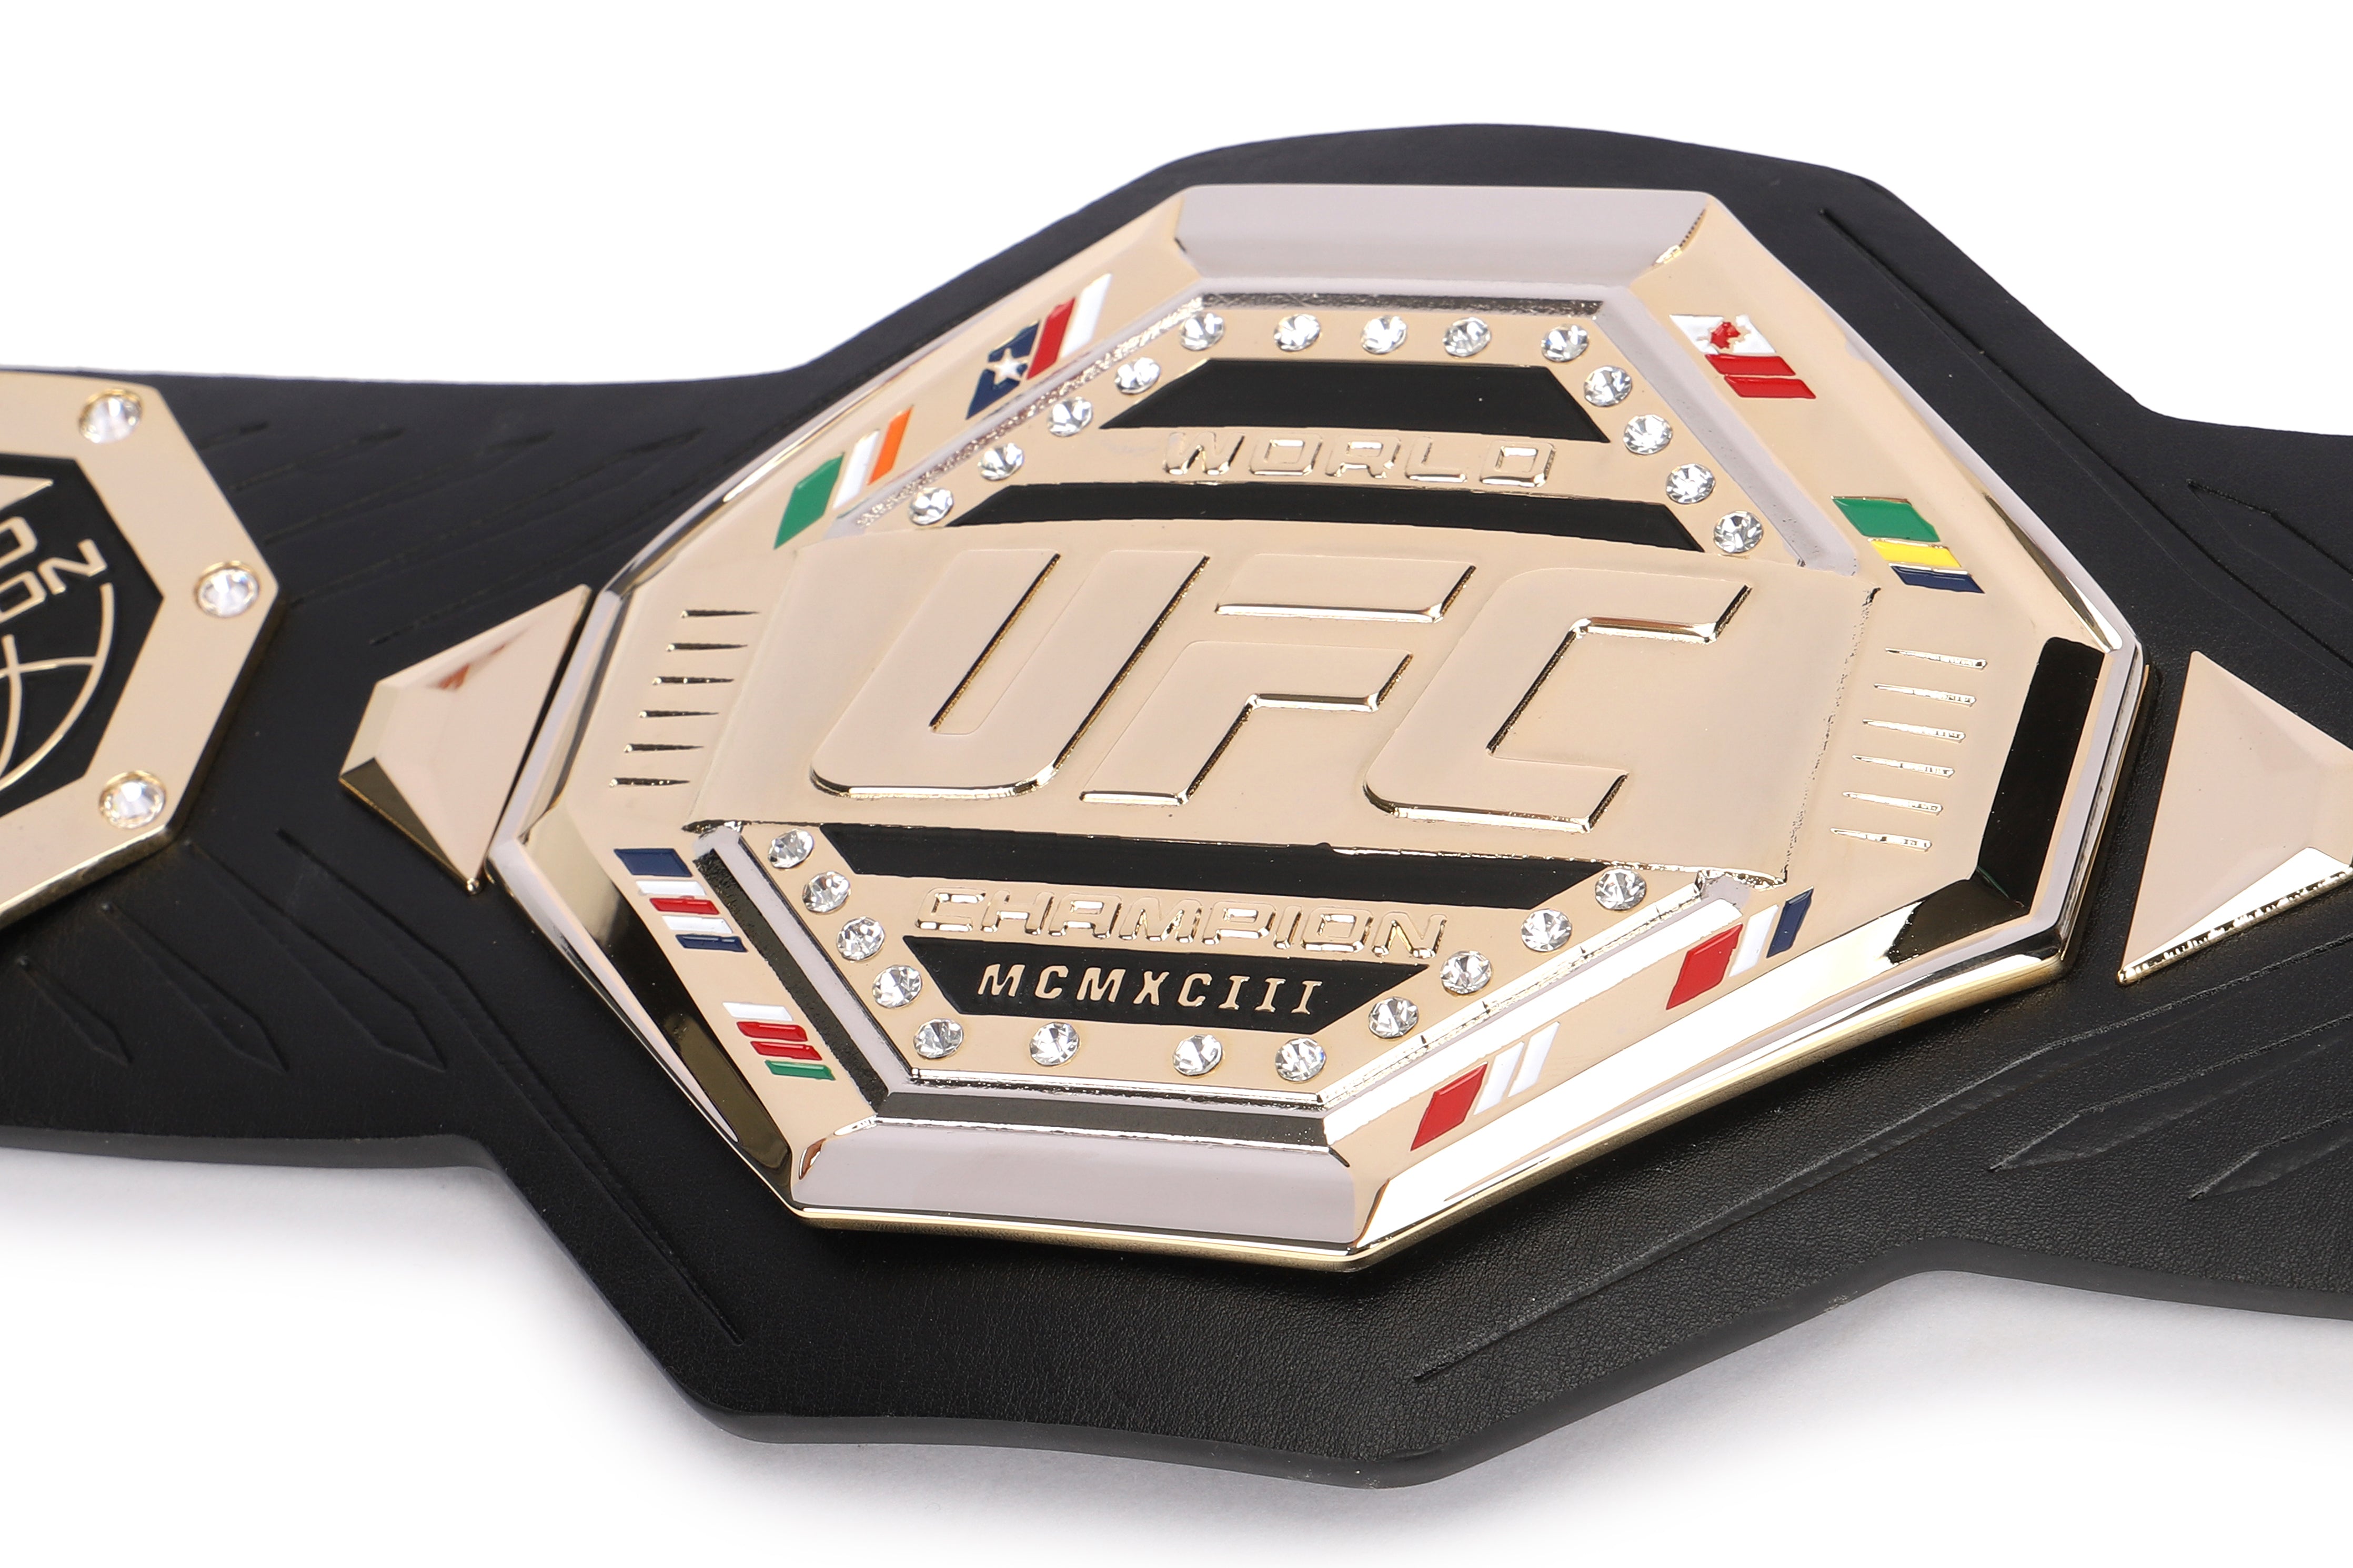 UFC LEGACY CHAMPIONSHIP BELT ULTIMATE FIGHTING MMA ROLEPLAY REPLICA BELT NEW